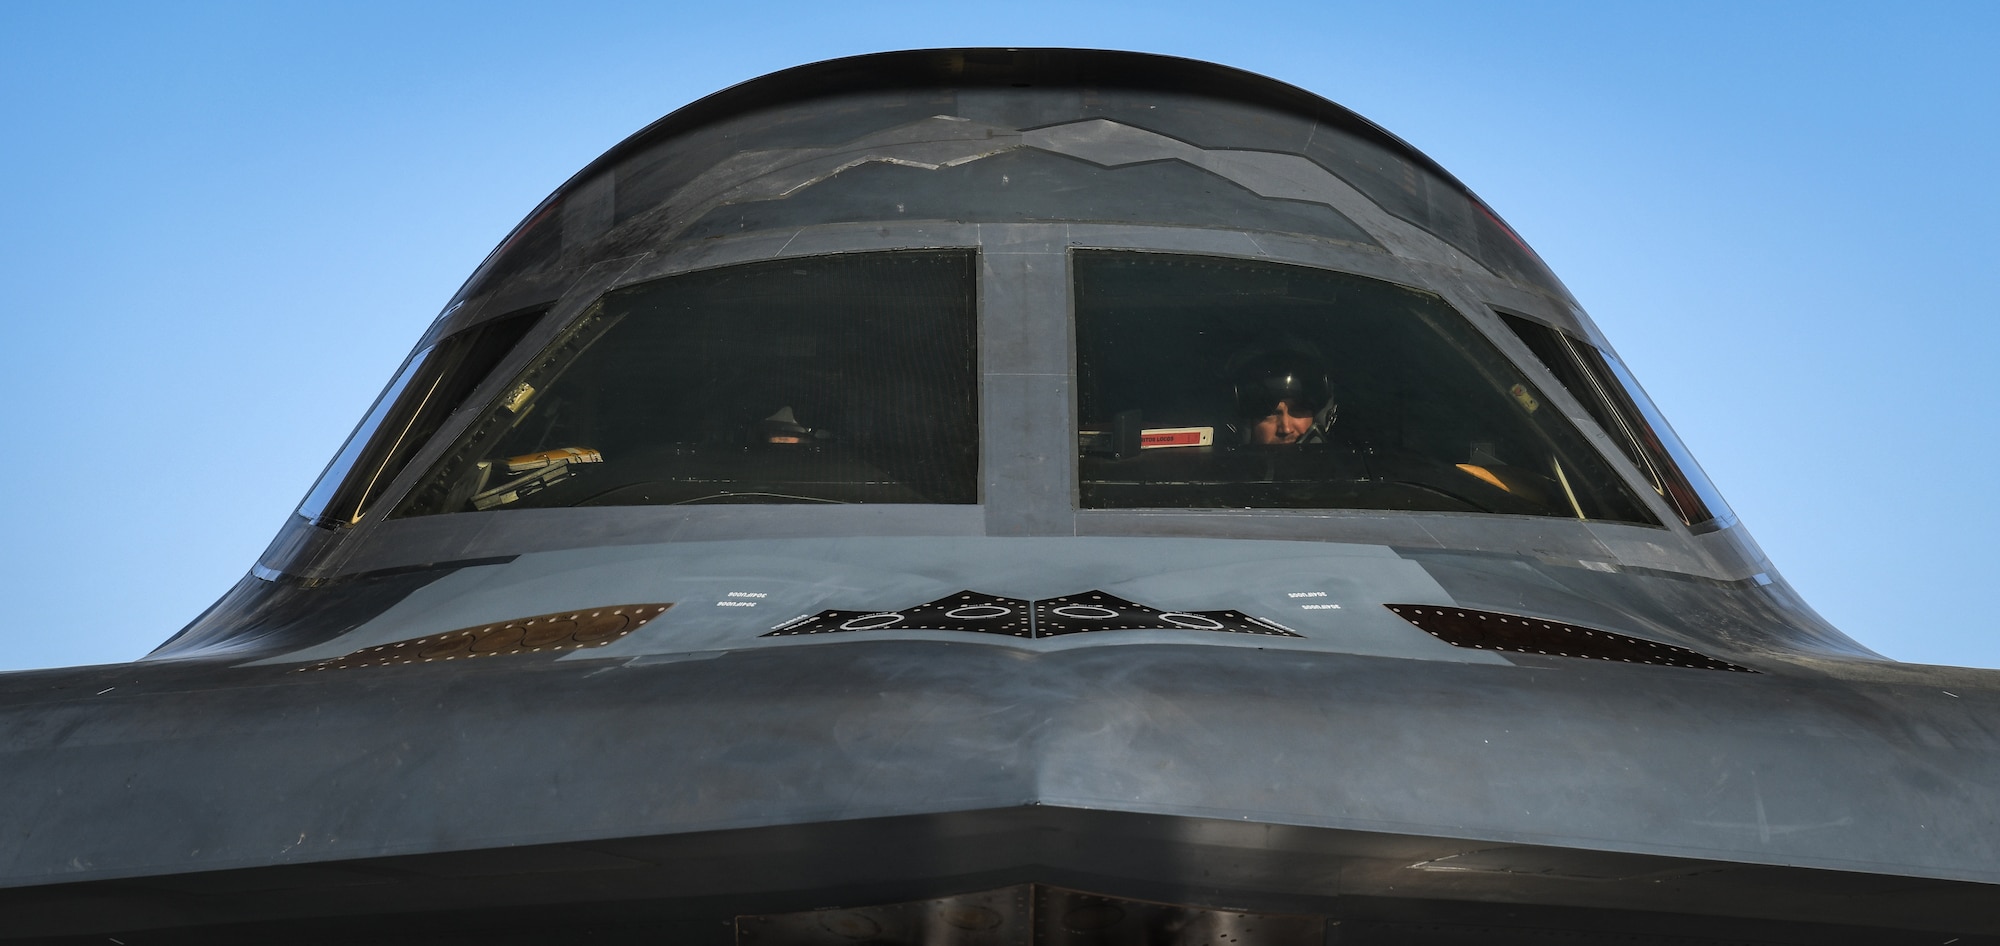 A U.S. Air Force B-2 Spirit aircrew performs pre-flight checks in the cockpit of their aircraft at Whiteman Air Force Base, Missouri, March 8, 2020. The B-2 took off from Whiteman AFB to support U.S. Strategic Command Bomber Task Force operations in Europe. The 131st Bomb Wing is the total-force partner unit to the 509th Bomb Wing.  (U.S. Air Force photo by Tech. Sgt. Alexander W. Riedel)